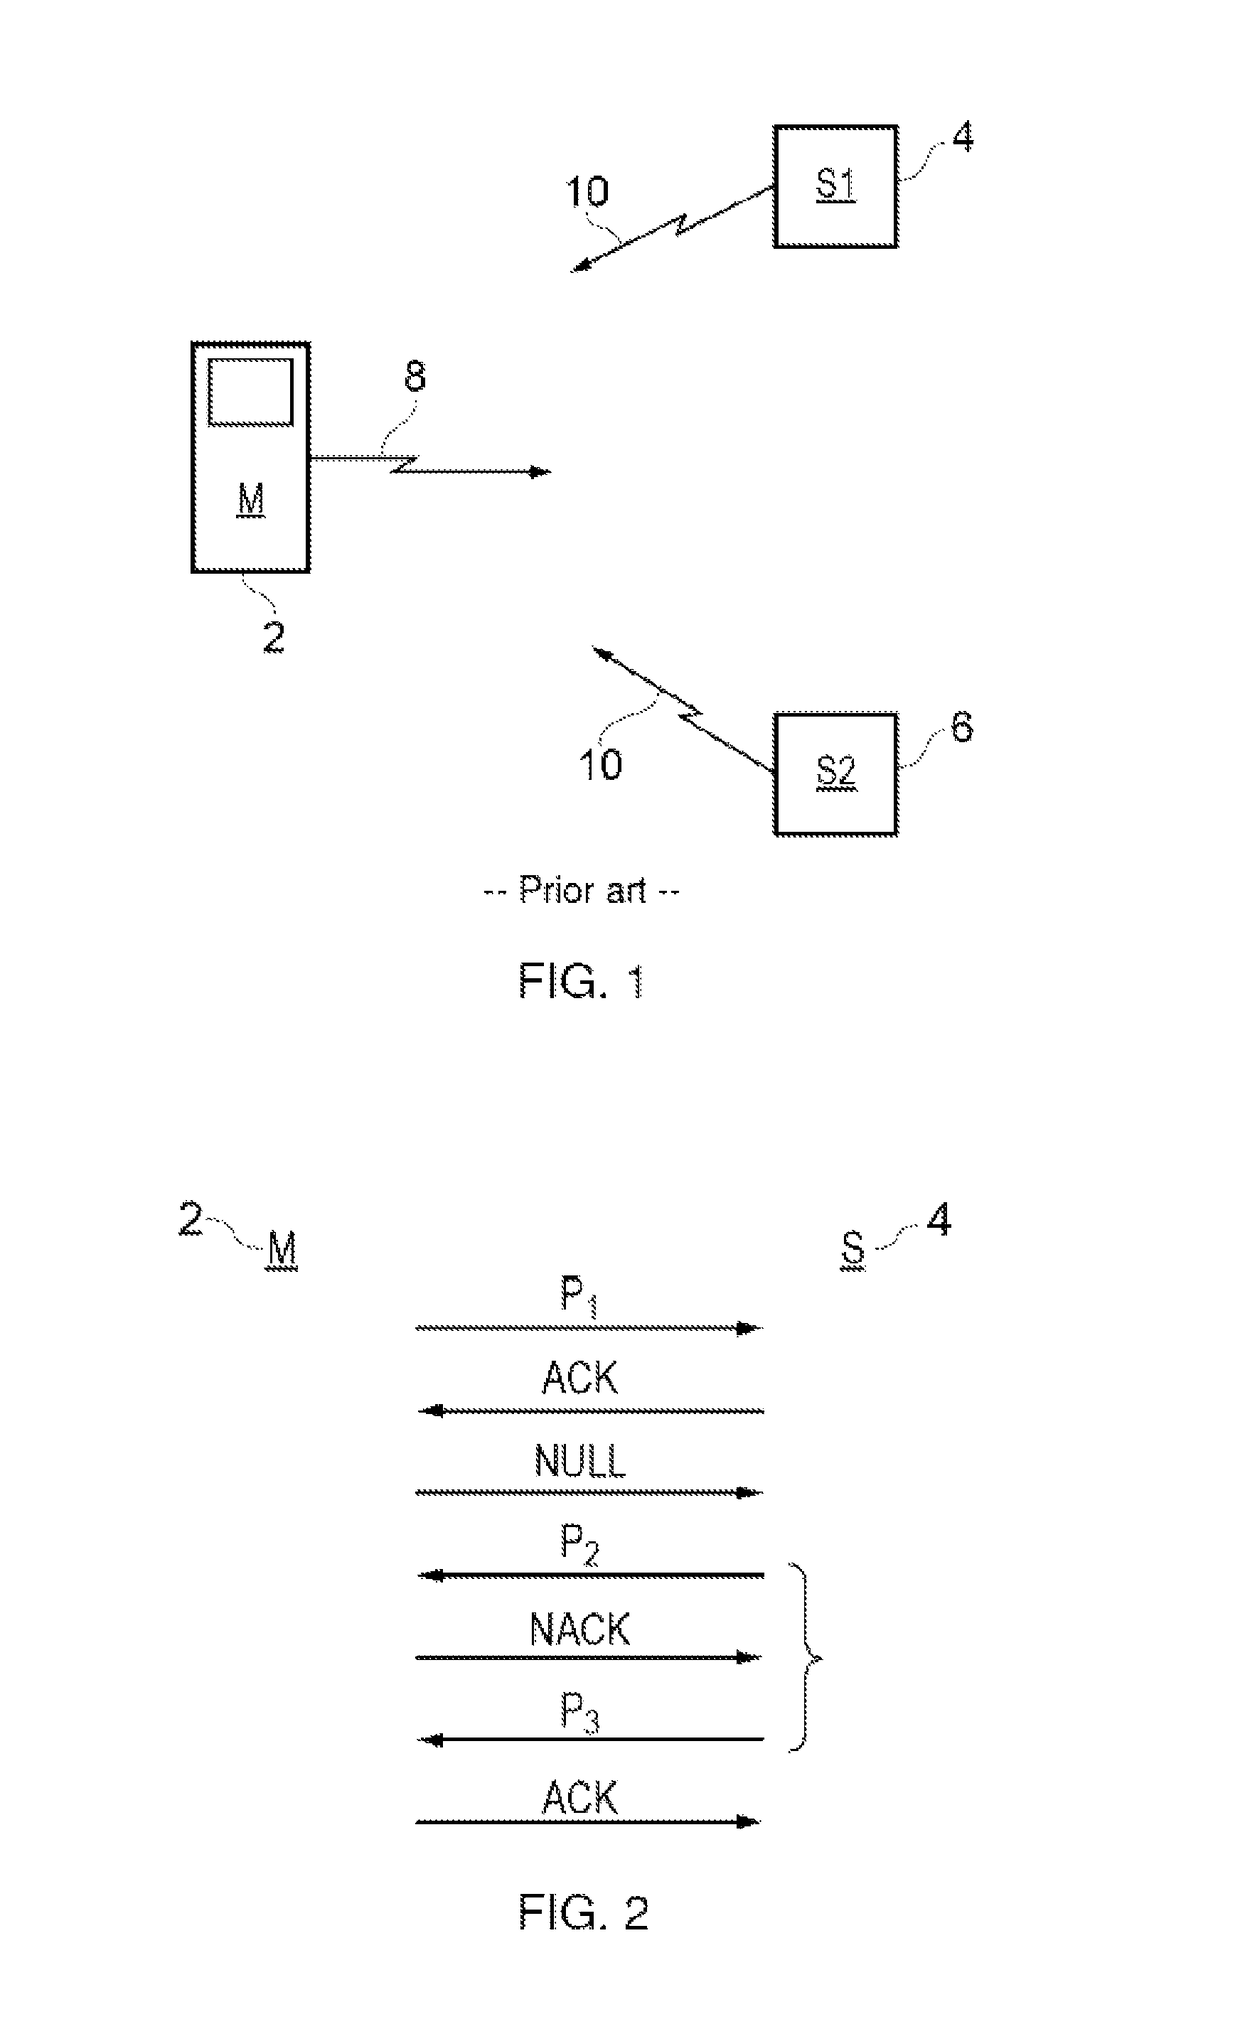 Method of generating repeated data package transmission